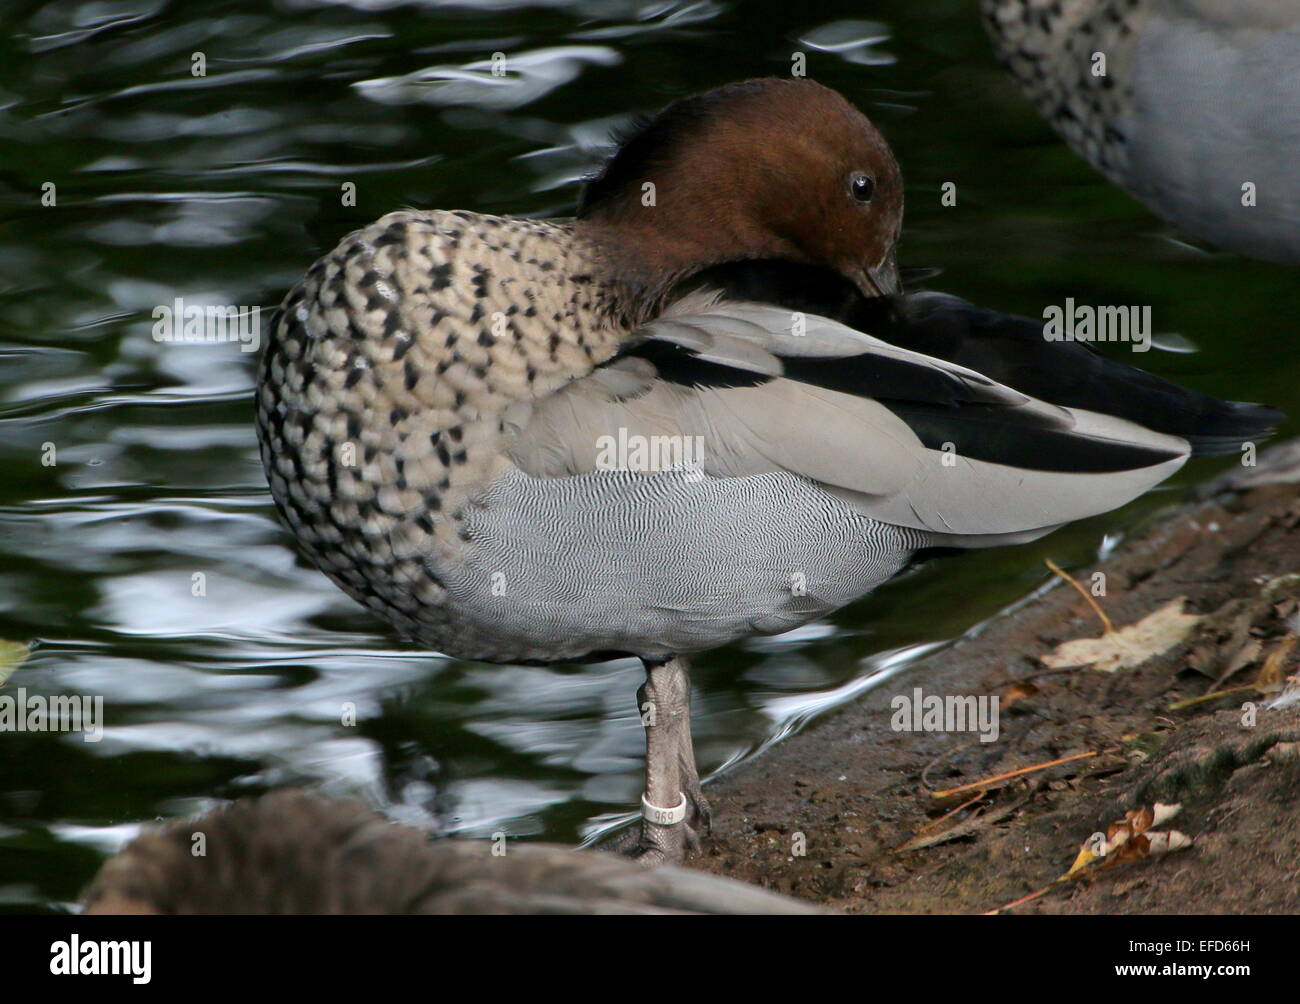 Male Australian wood duck a.k.a maned goose (Chenonetta jubata) in close-up, preening his feathers Stock Photo